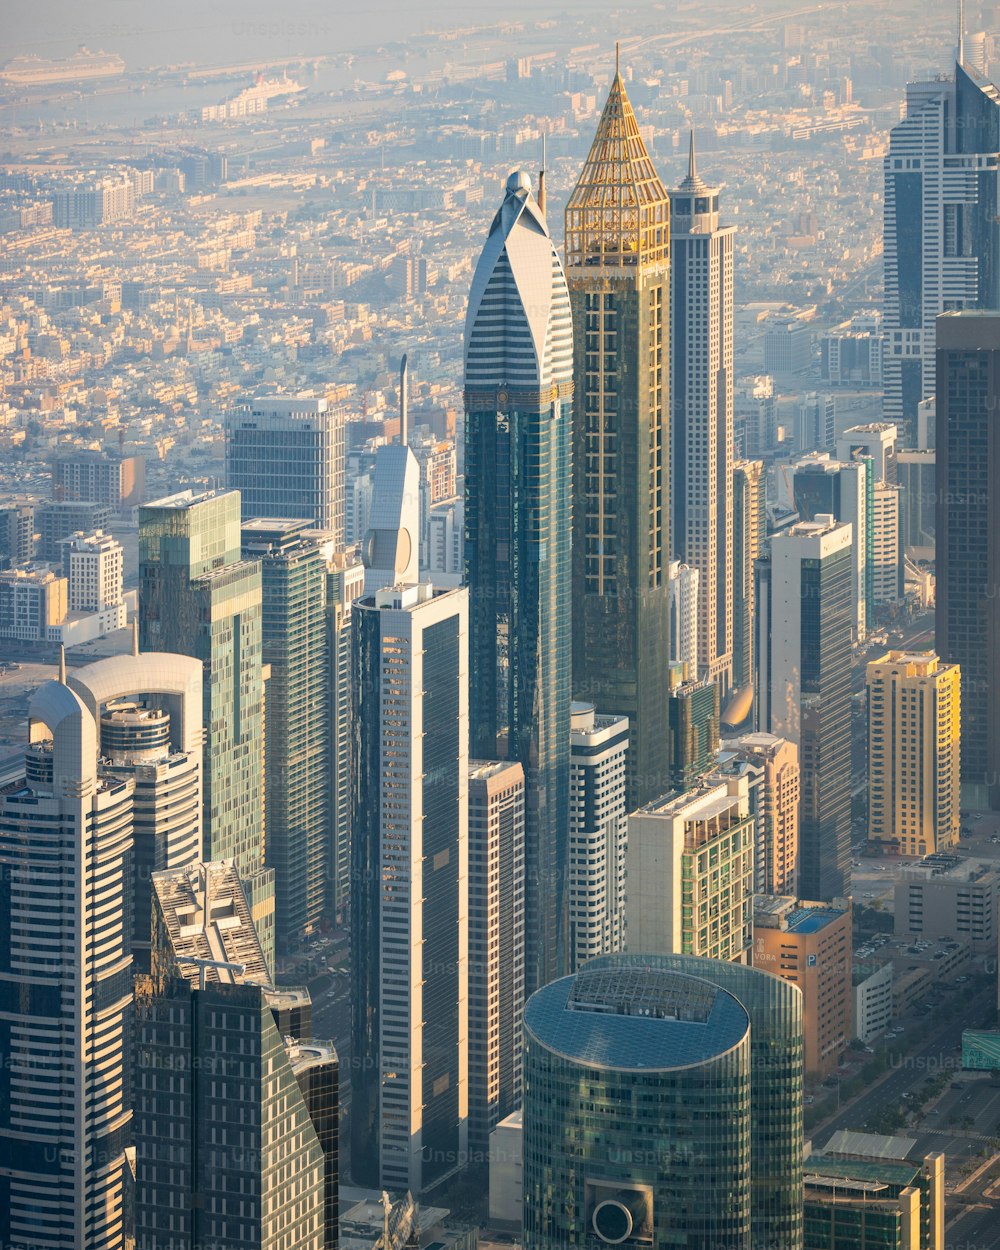 An aerial shot of bustling modern cityscape featuring multiple tall skyscrapers in Dubai, UAE.